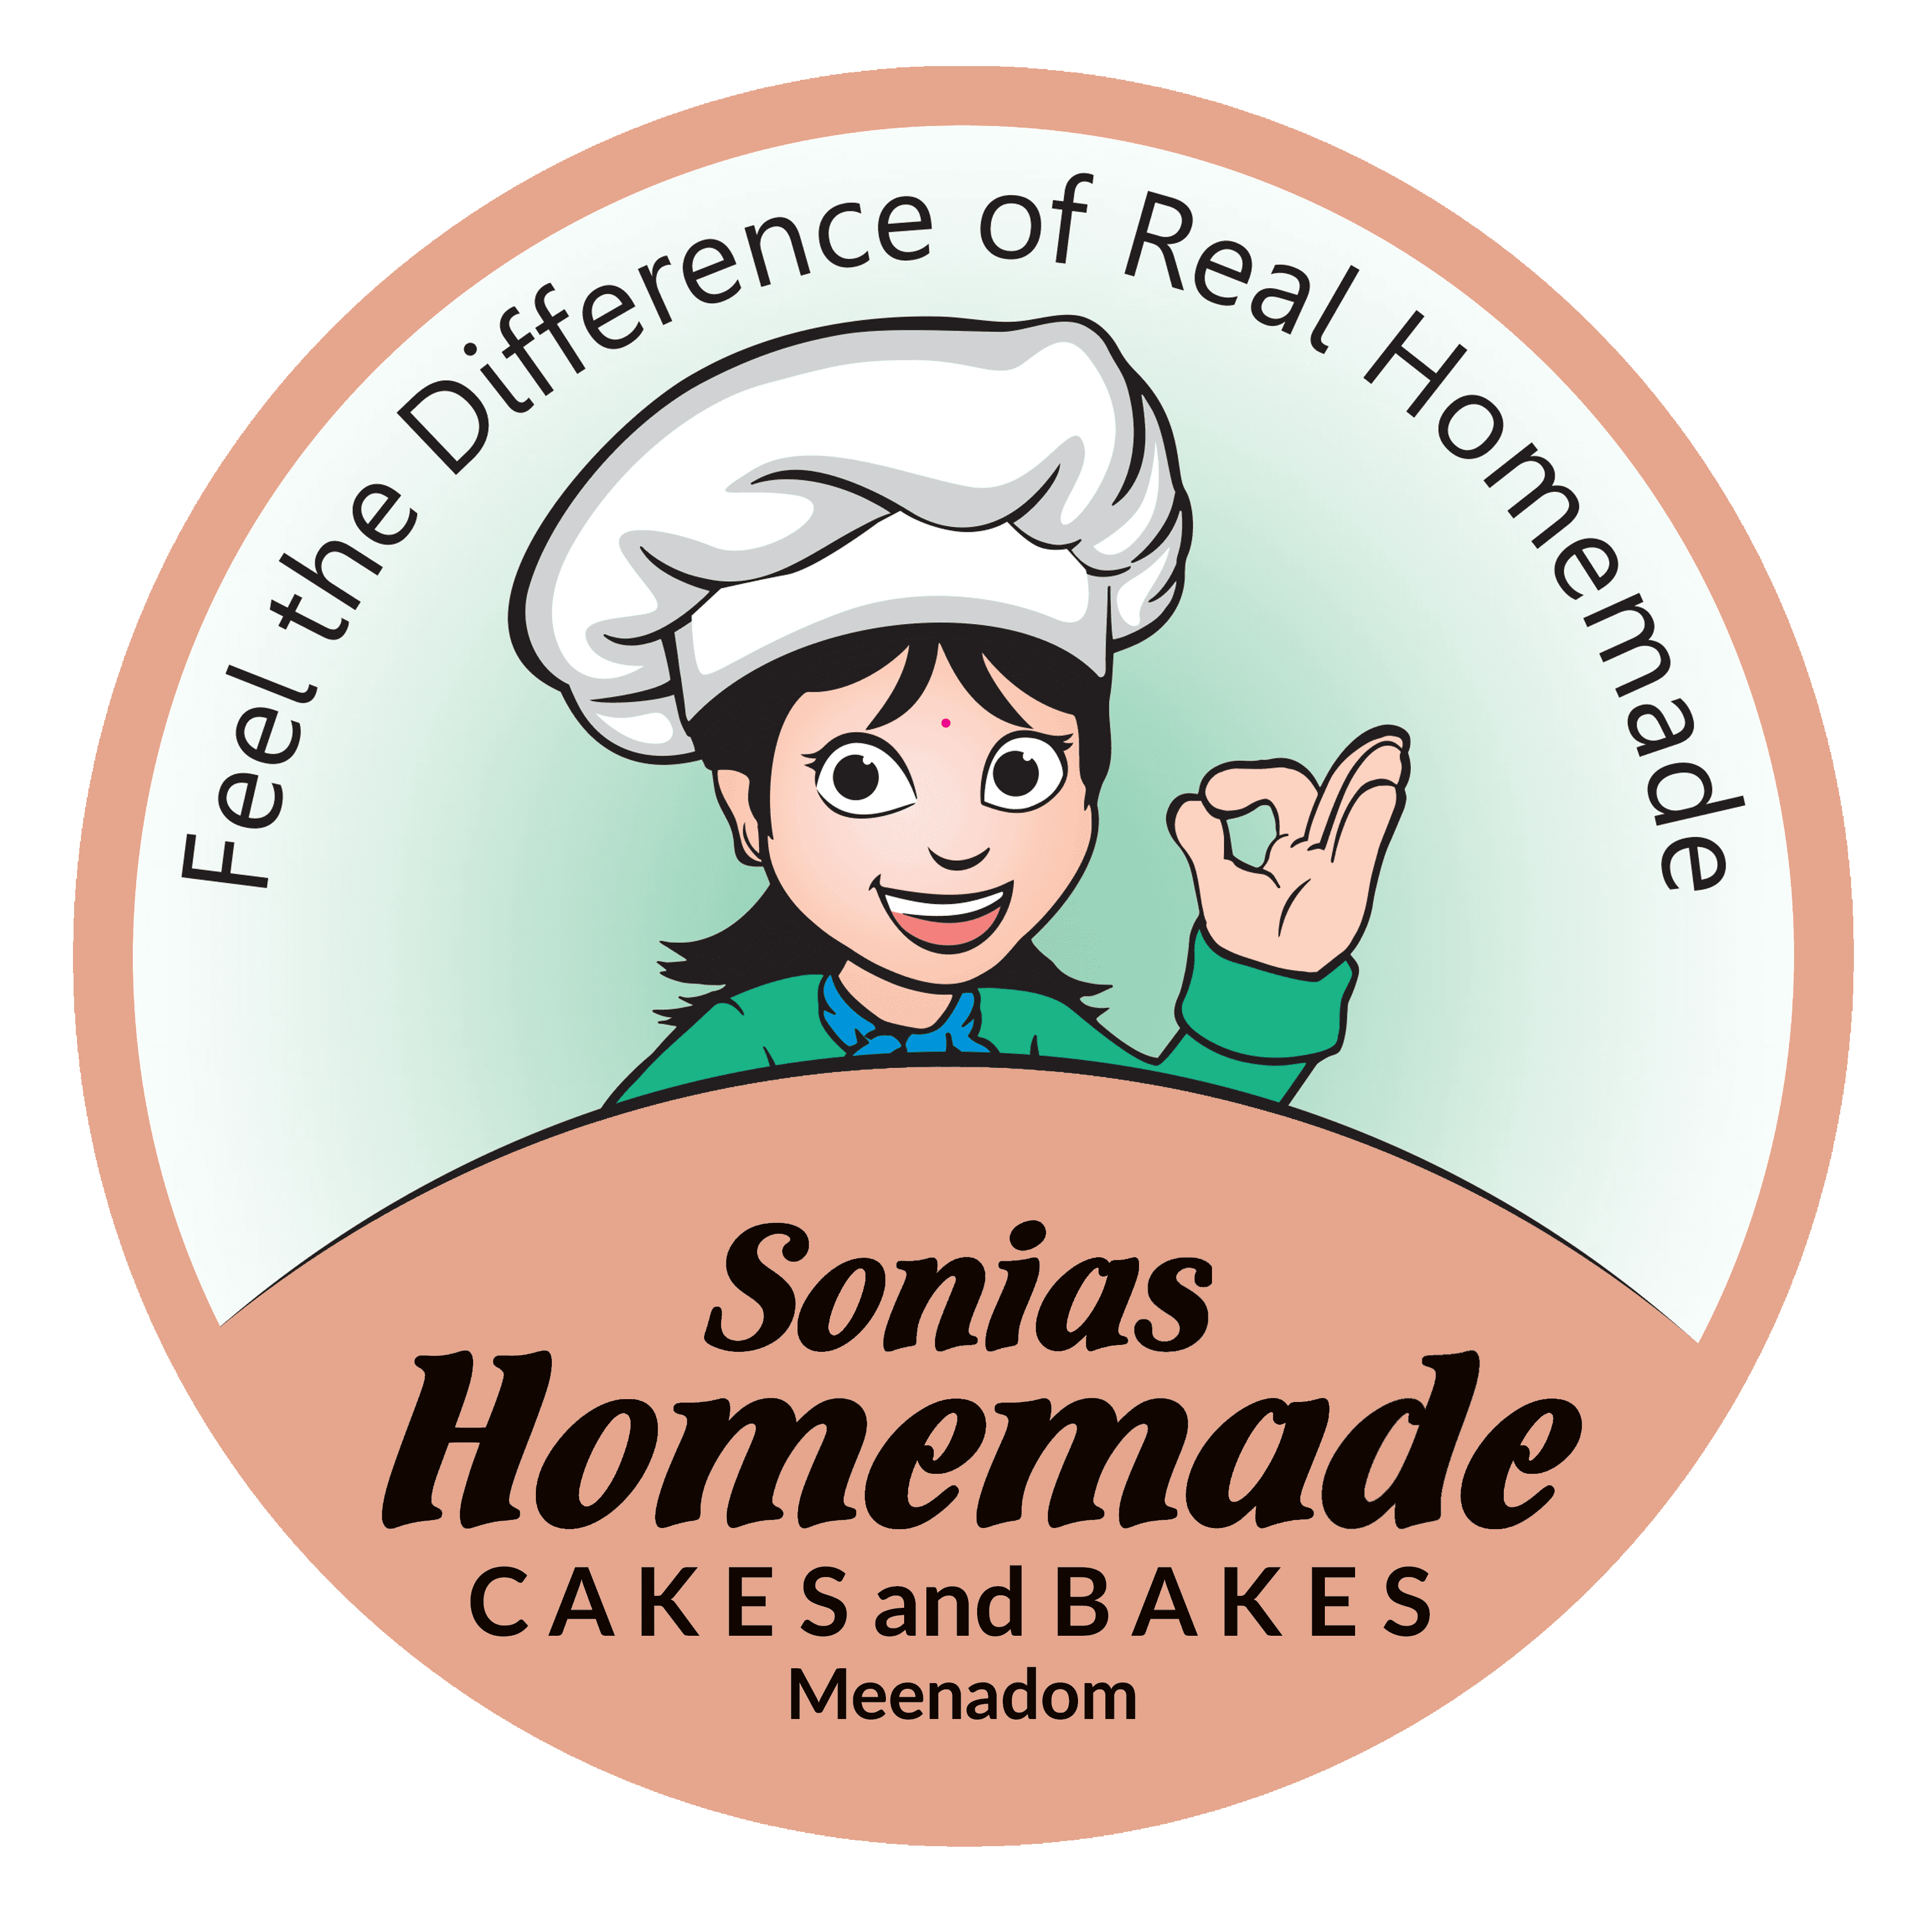 Sonia's Homemade Cakes and Bakes